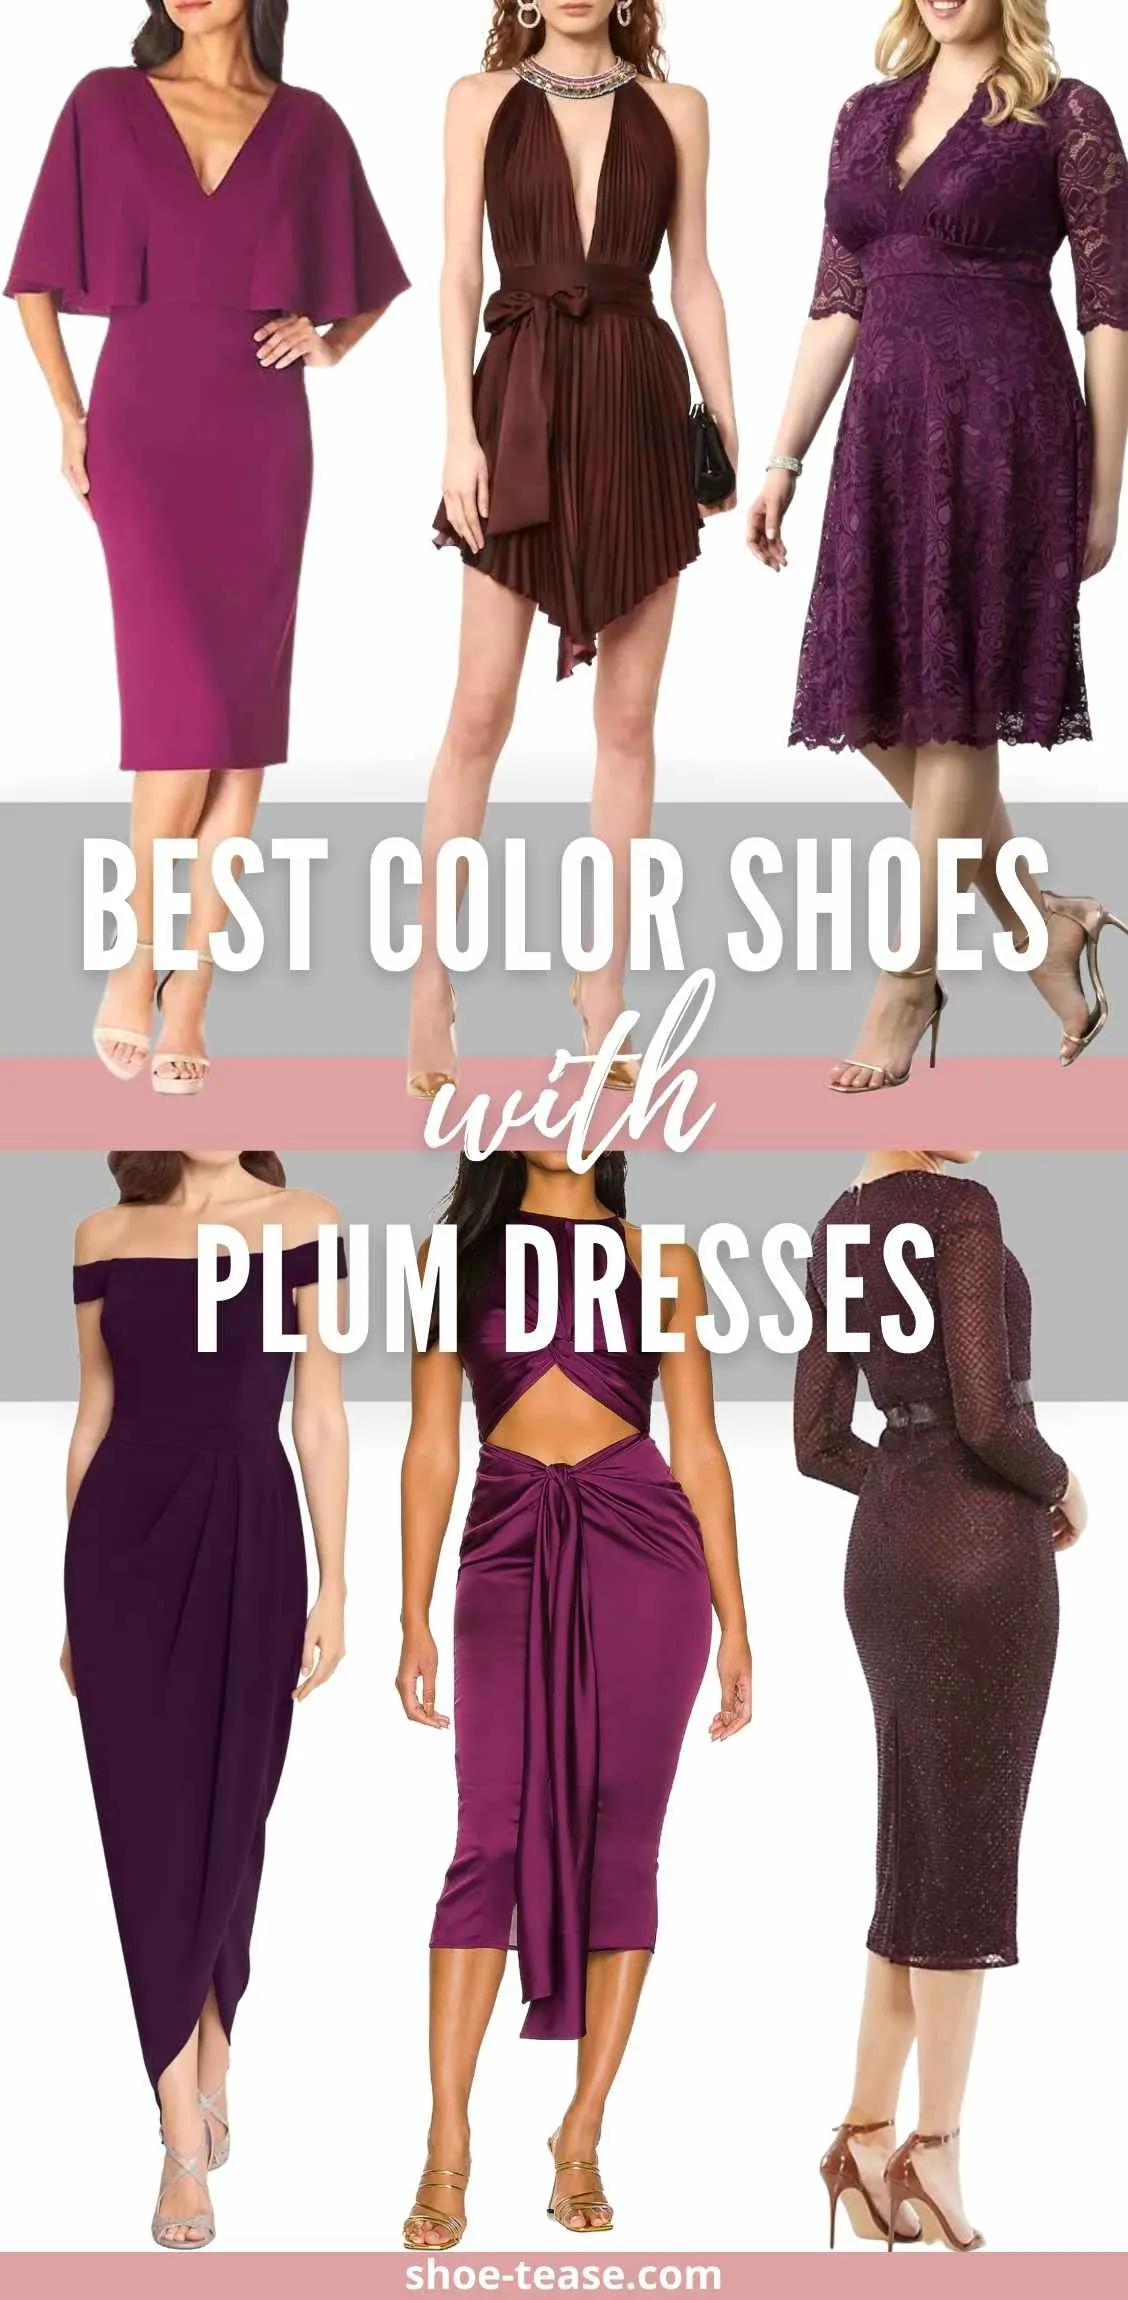 Text reading best color shoes with plum dresses over 6 women wearing different plum dress outfits.